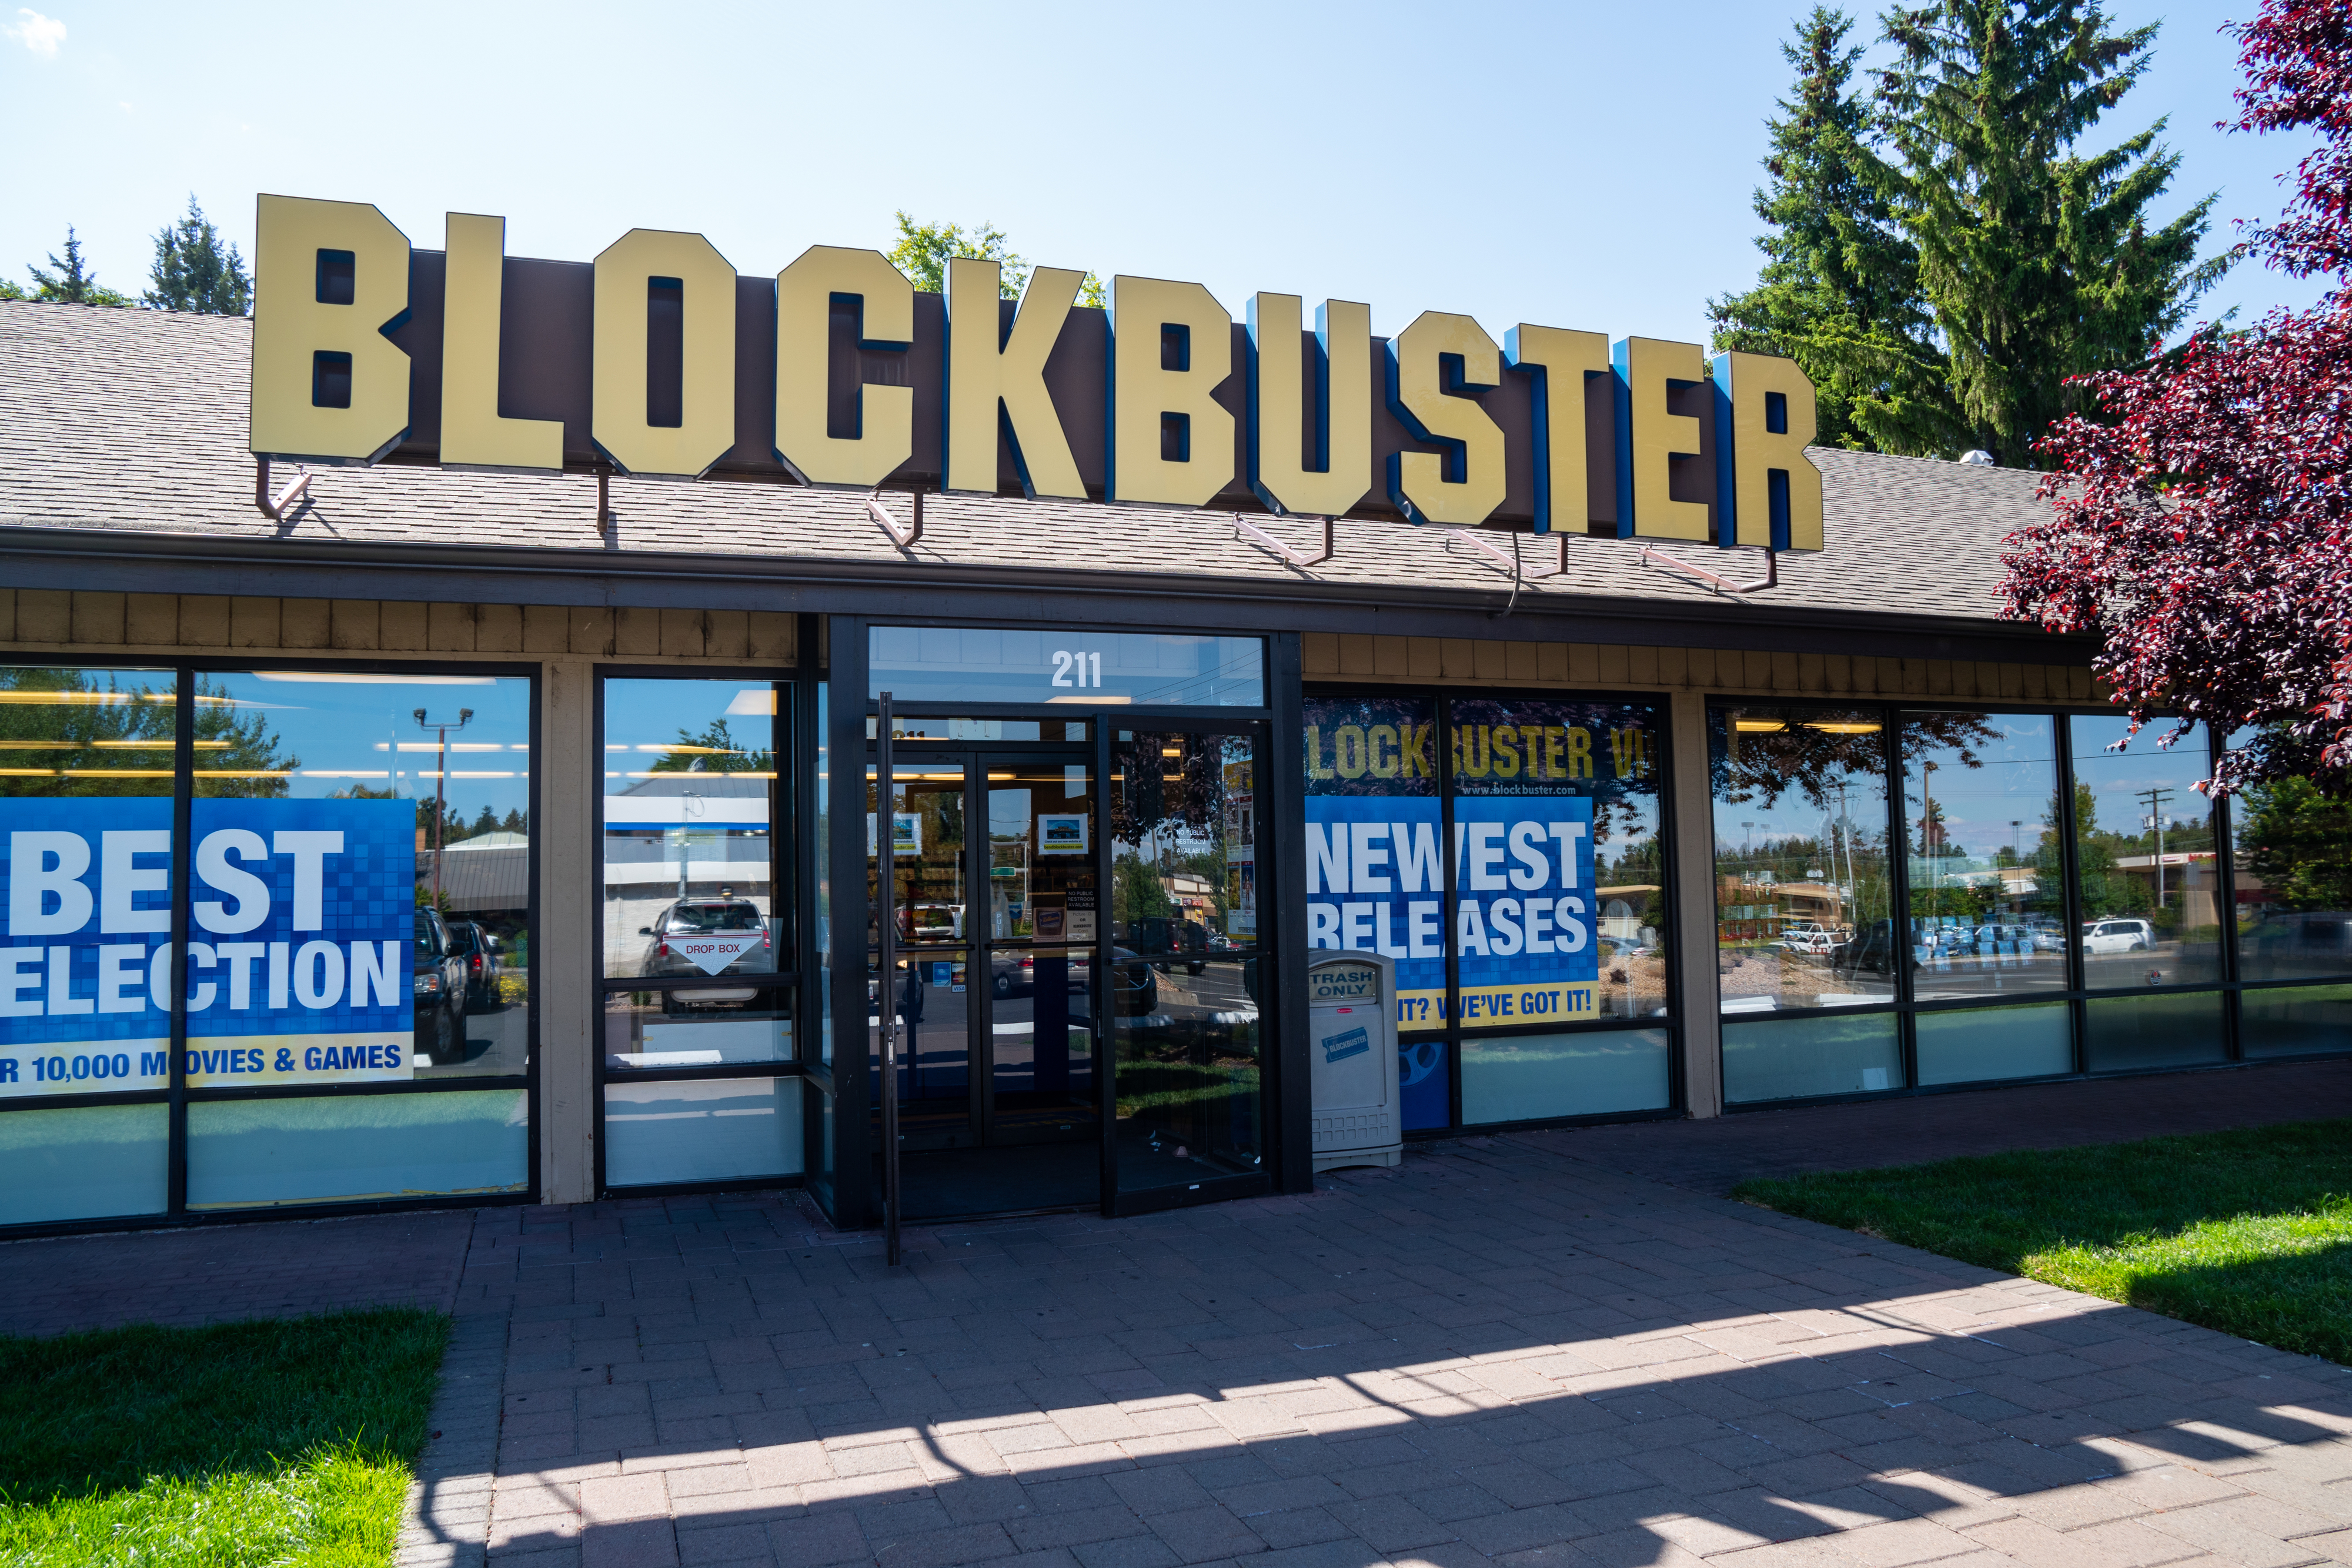 Exterior of a Blockbuster store with signs reading &quot;Best Selection&quot; and &quot;Newest Releases&quot; on its windows. The store has a large yellow Blockbuster sign above